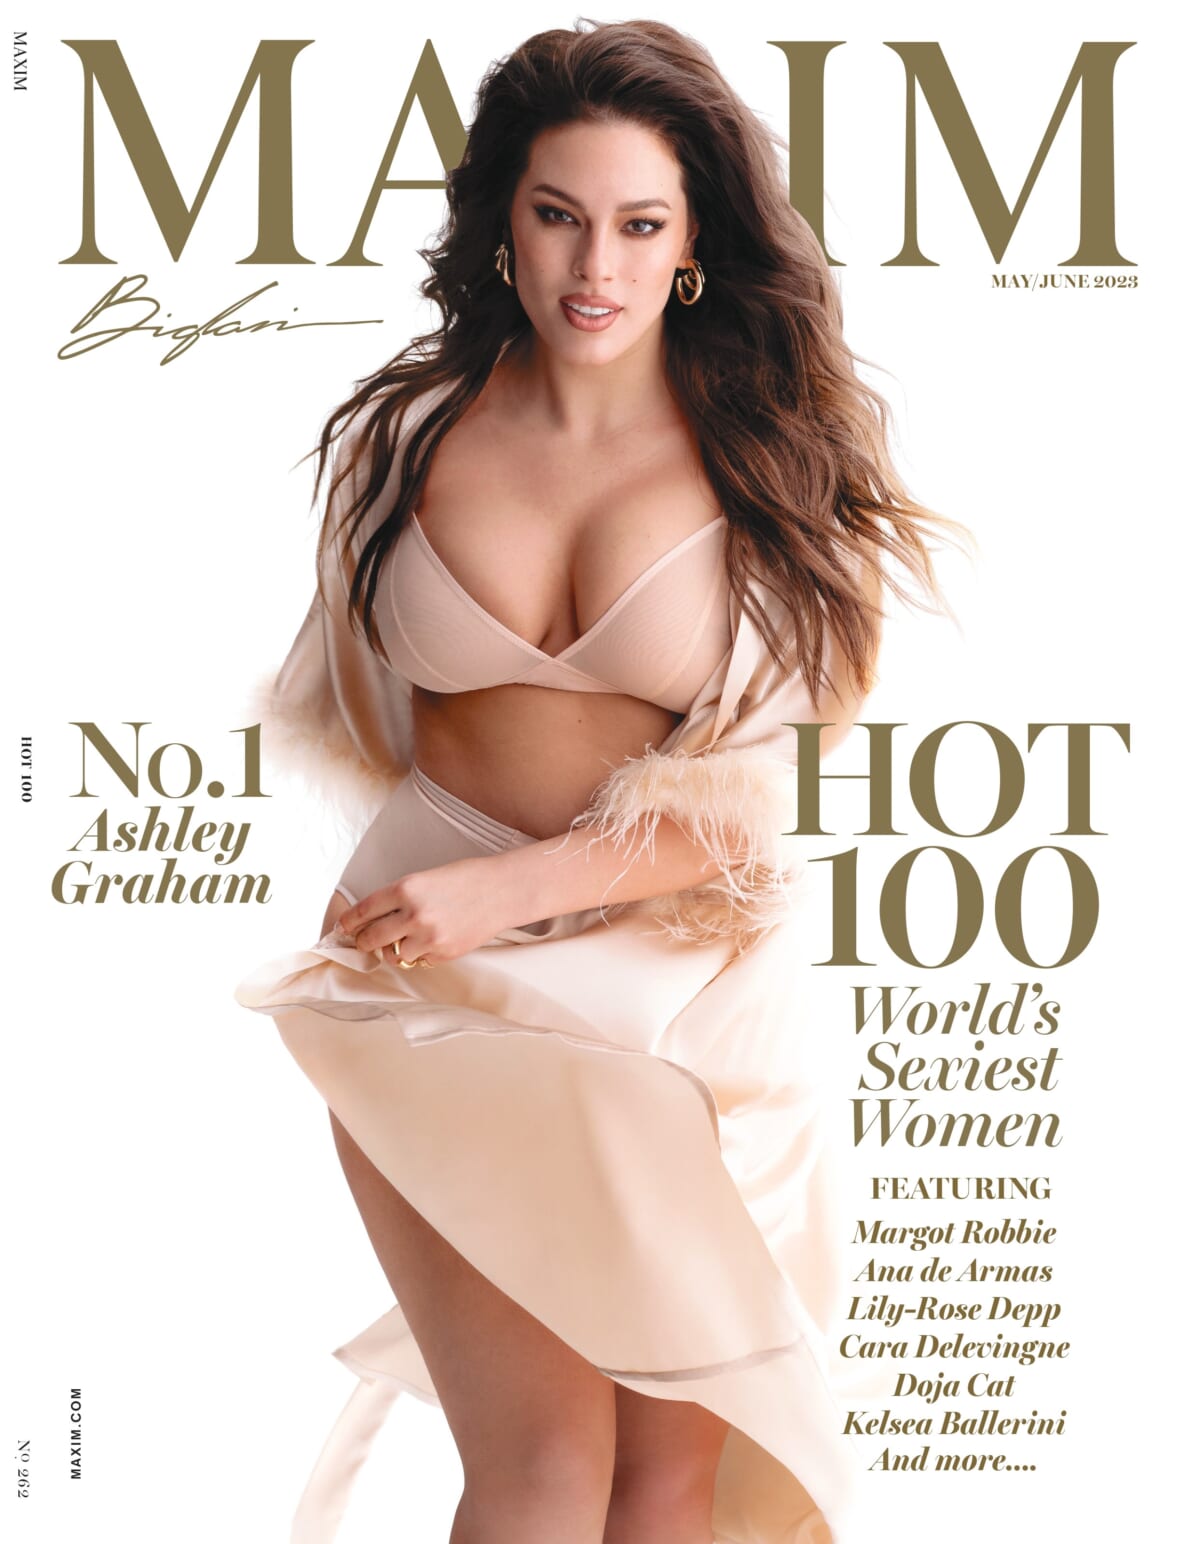 Worlds Sexiest Woman Ashley Graham Is Maxims 2023 Hot 100 Cover Star photo